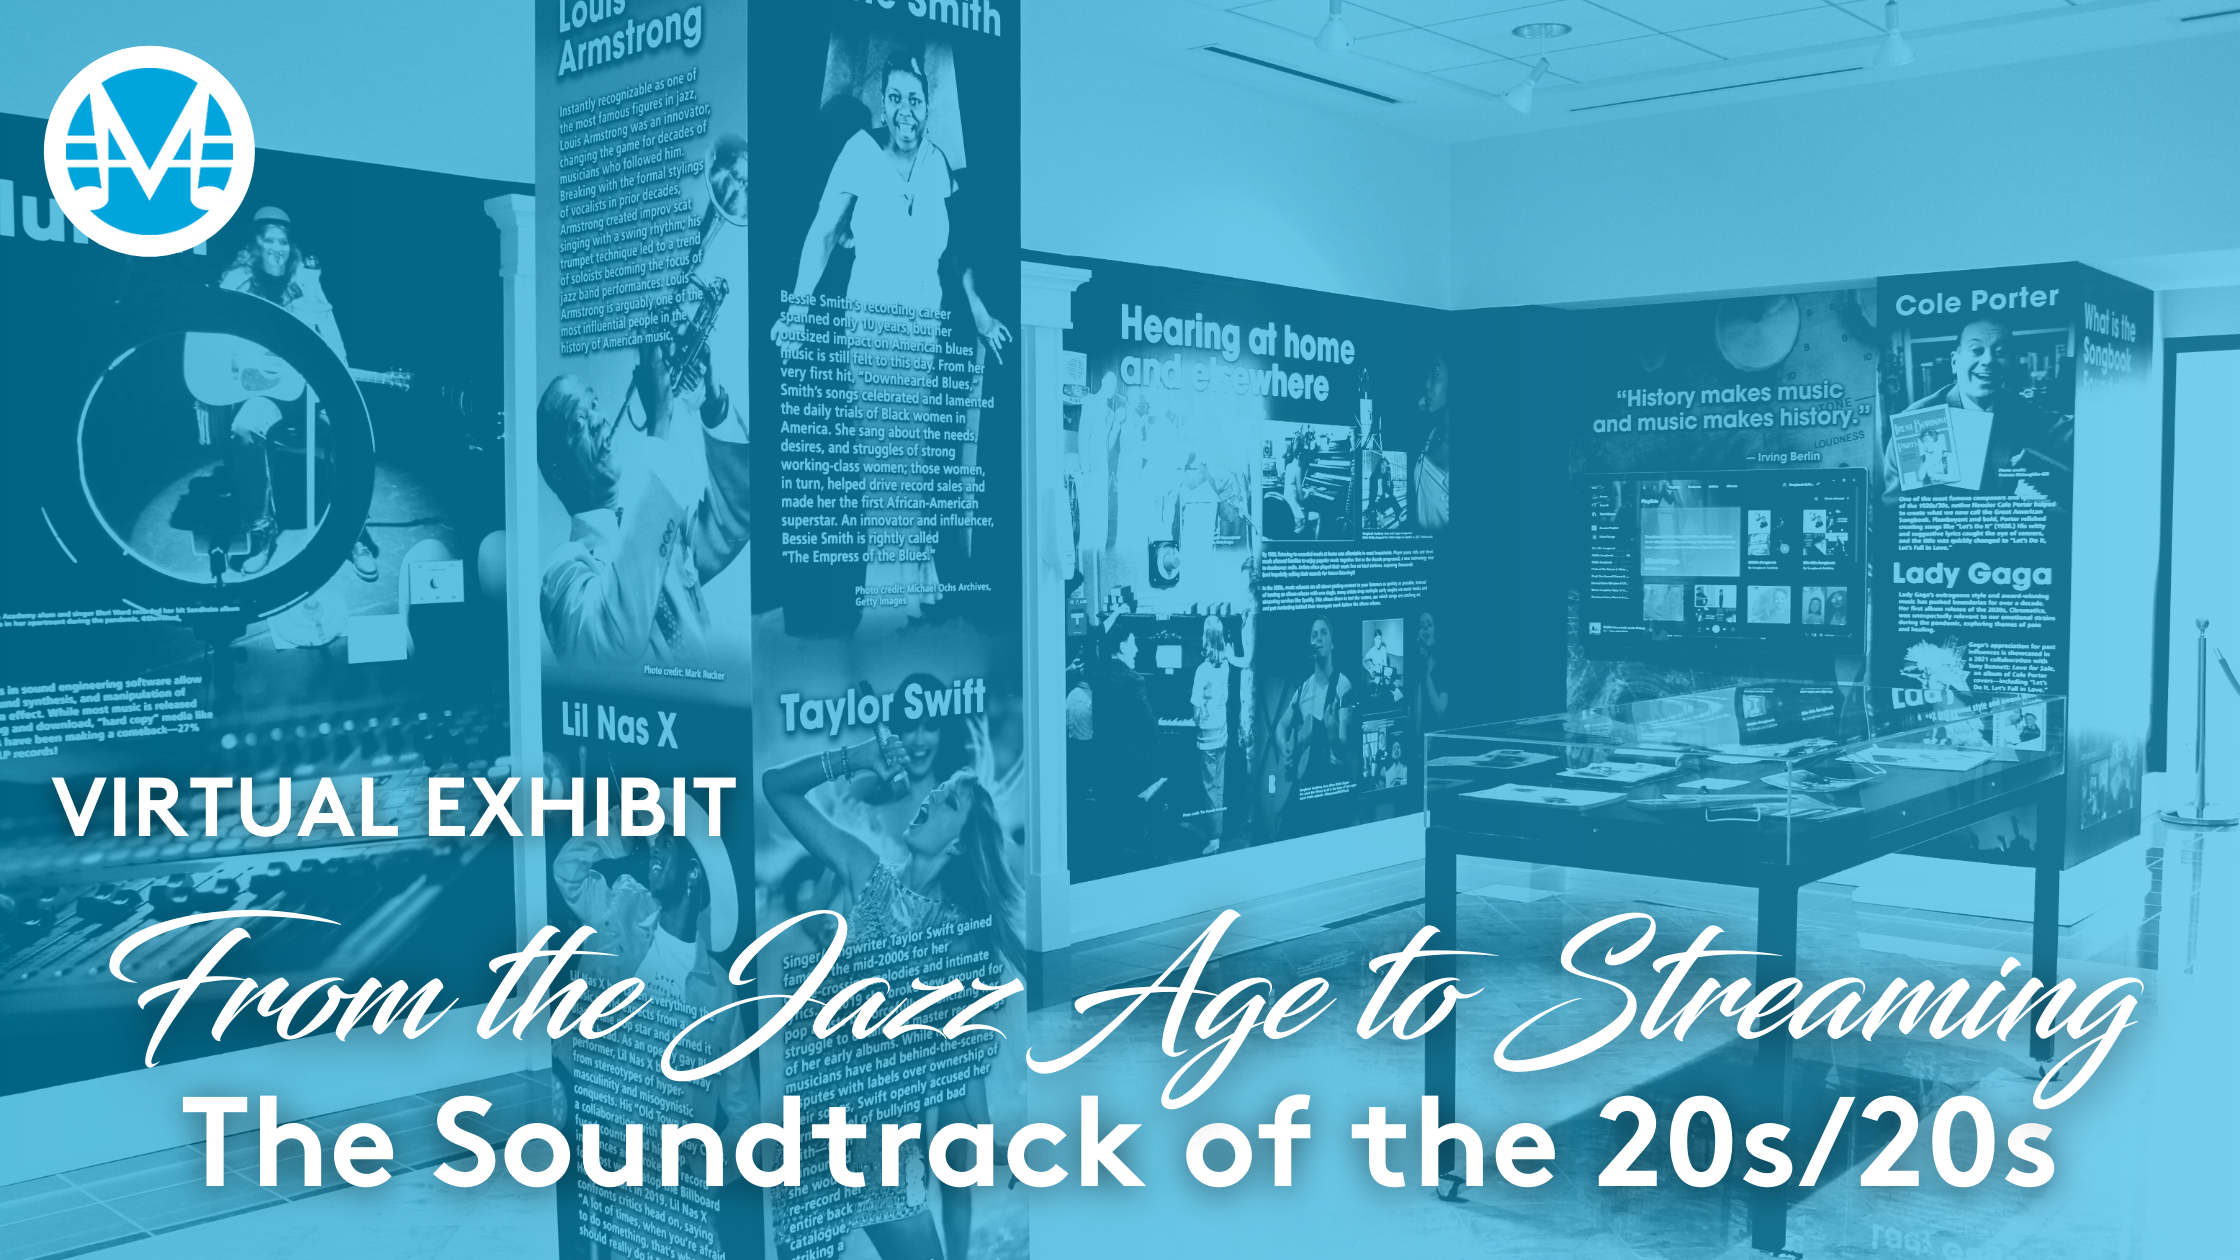 Virtual Exhibit: From the Jazz Age to Streaming The Soundtrack of the 20s/20s